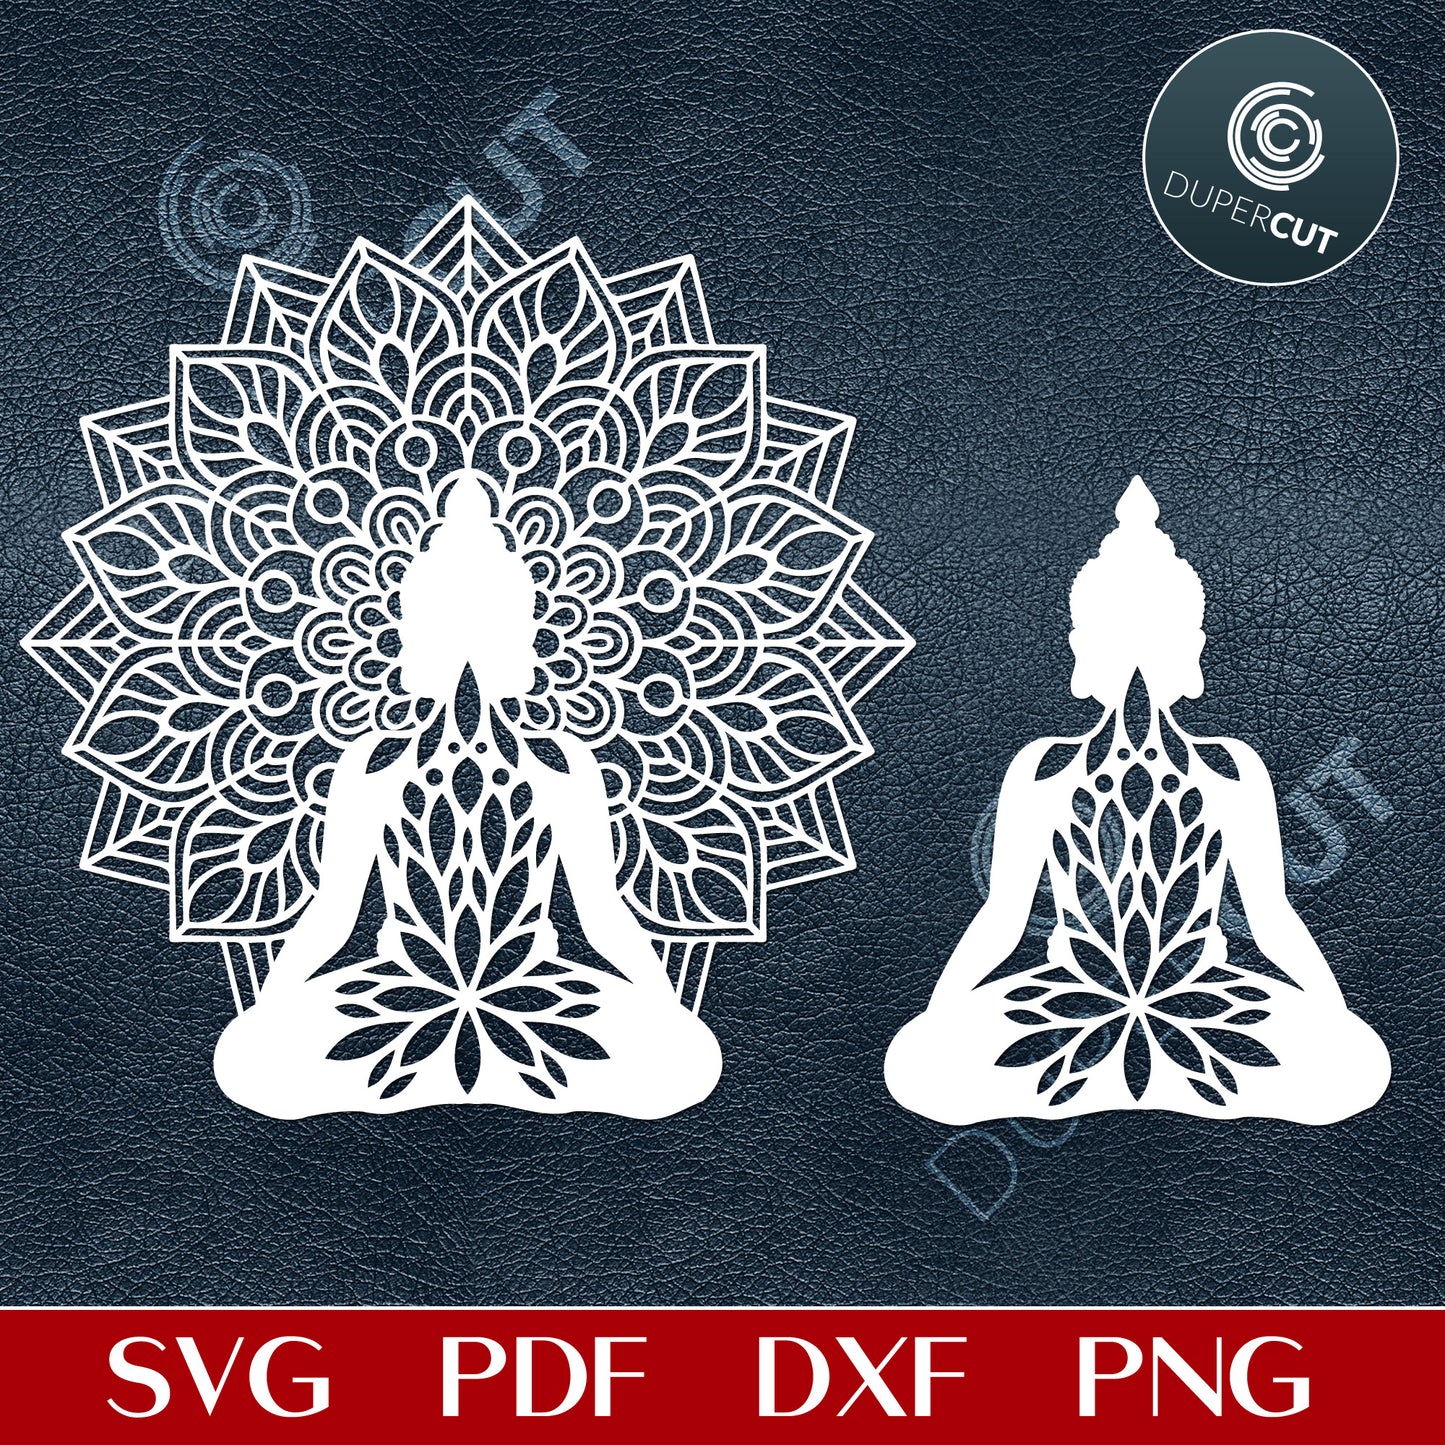 Meditating Buddha - SVG DXF PNG files for Cricut, Silhouette Cameo, Glowforge. For cutting machines, laser engraving, printing, mold making.